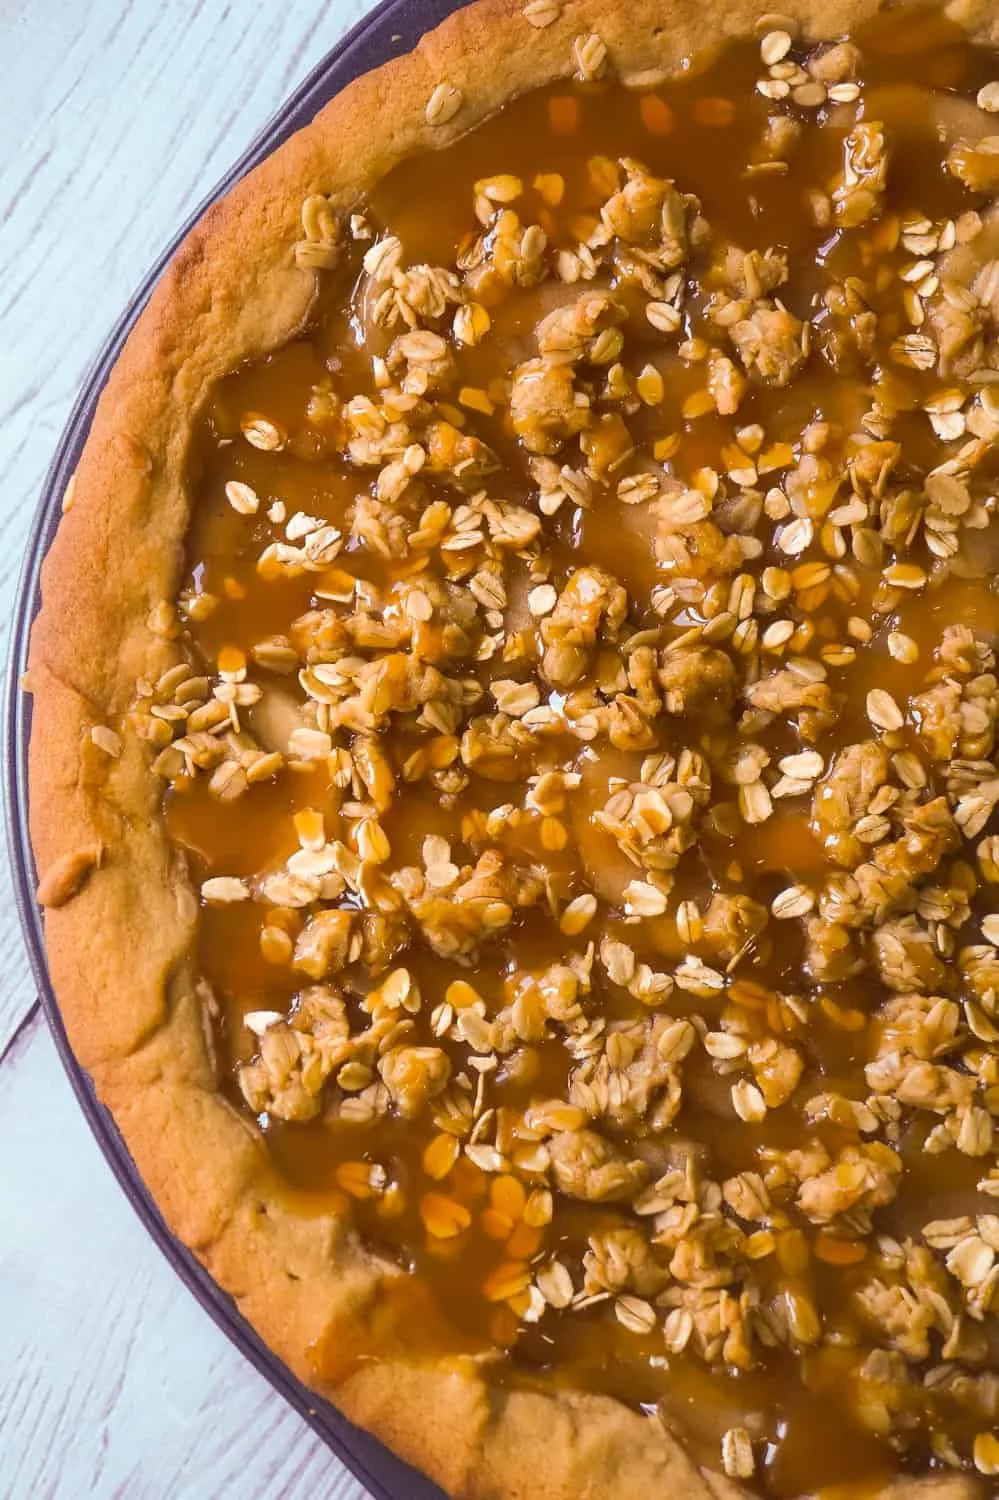 Peanut Butter Apple Pie Cookie Pizza is an easy dessert recipe for peanut butter lovers. A peanut butter cookie crust is topped with apple pie filling, peanut butter oat crumble and drizzled with caramel syrup.